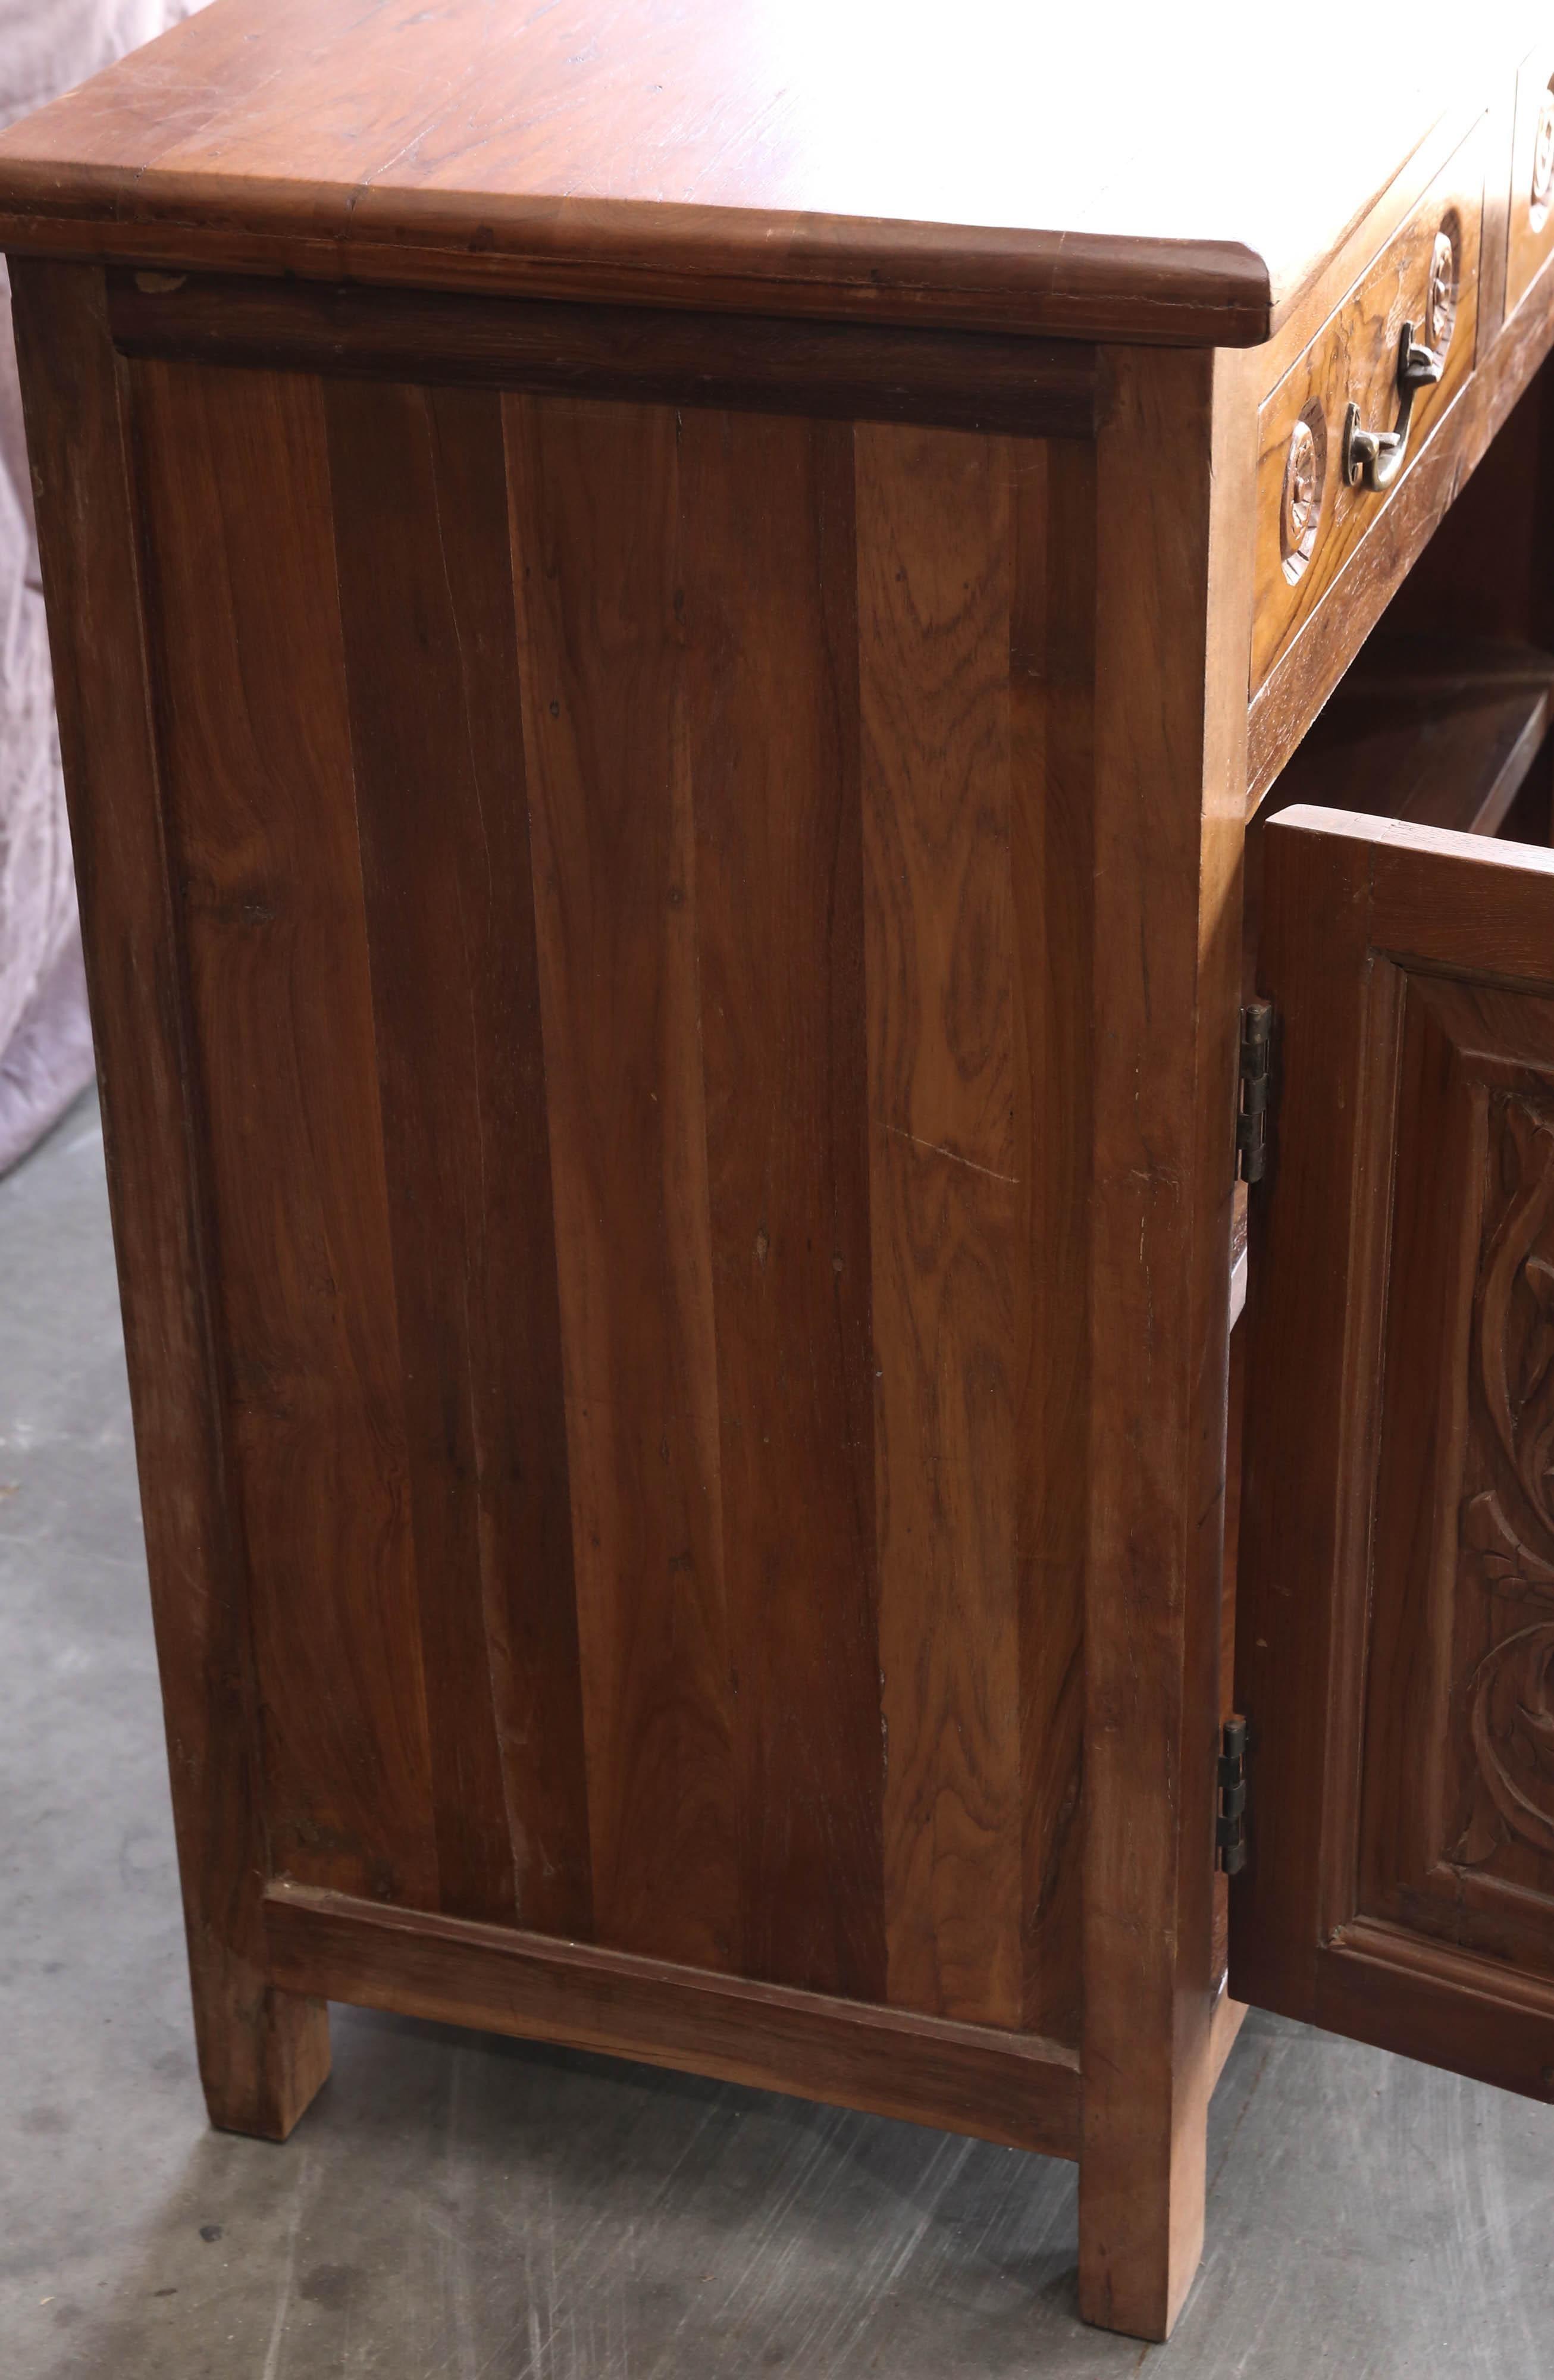 Solid Teak Wood Early 20th Century Entry Hall Credenza from a Tea Plantation 1